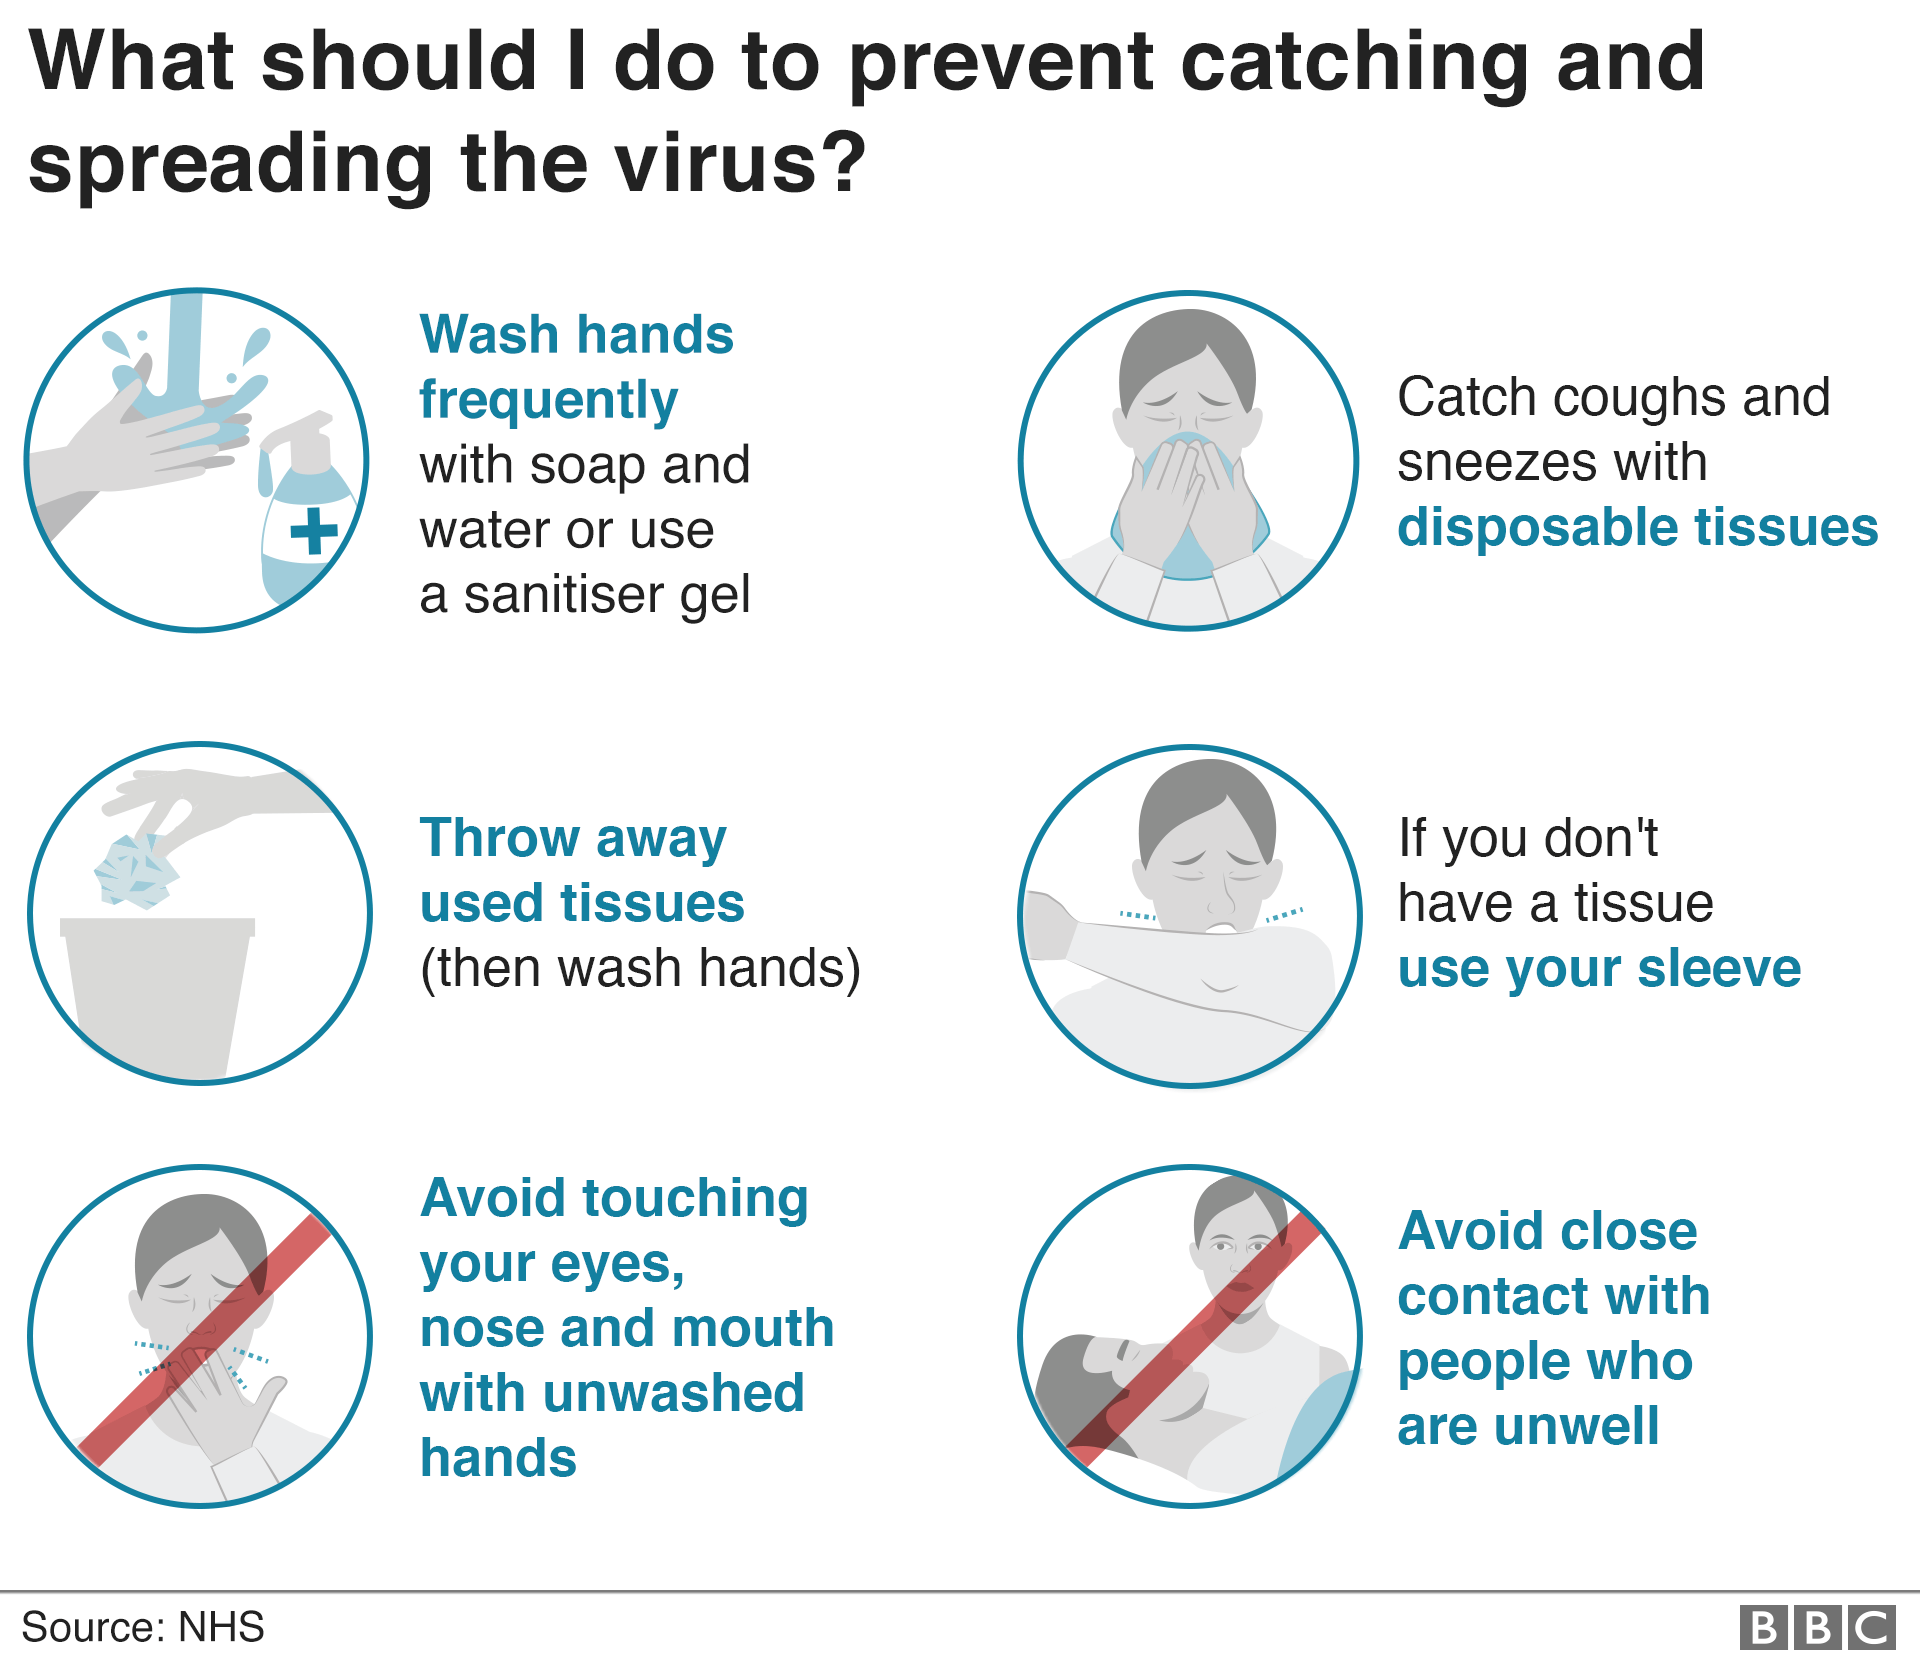 What should I do to prevent catching and spreading the virus? NHS advice: wash hands frequently with soap and water or sanitiser gel; catch coughs and sneezes with disposable tissues; throw away used tissues (then wash hands); if you don't have a tissue, use your sleeve; avoid touching your eyes, nose and mouth with unwashed hands; avoid close contact with people who are unwell